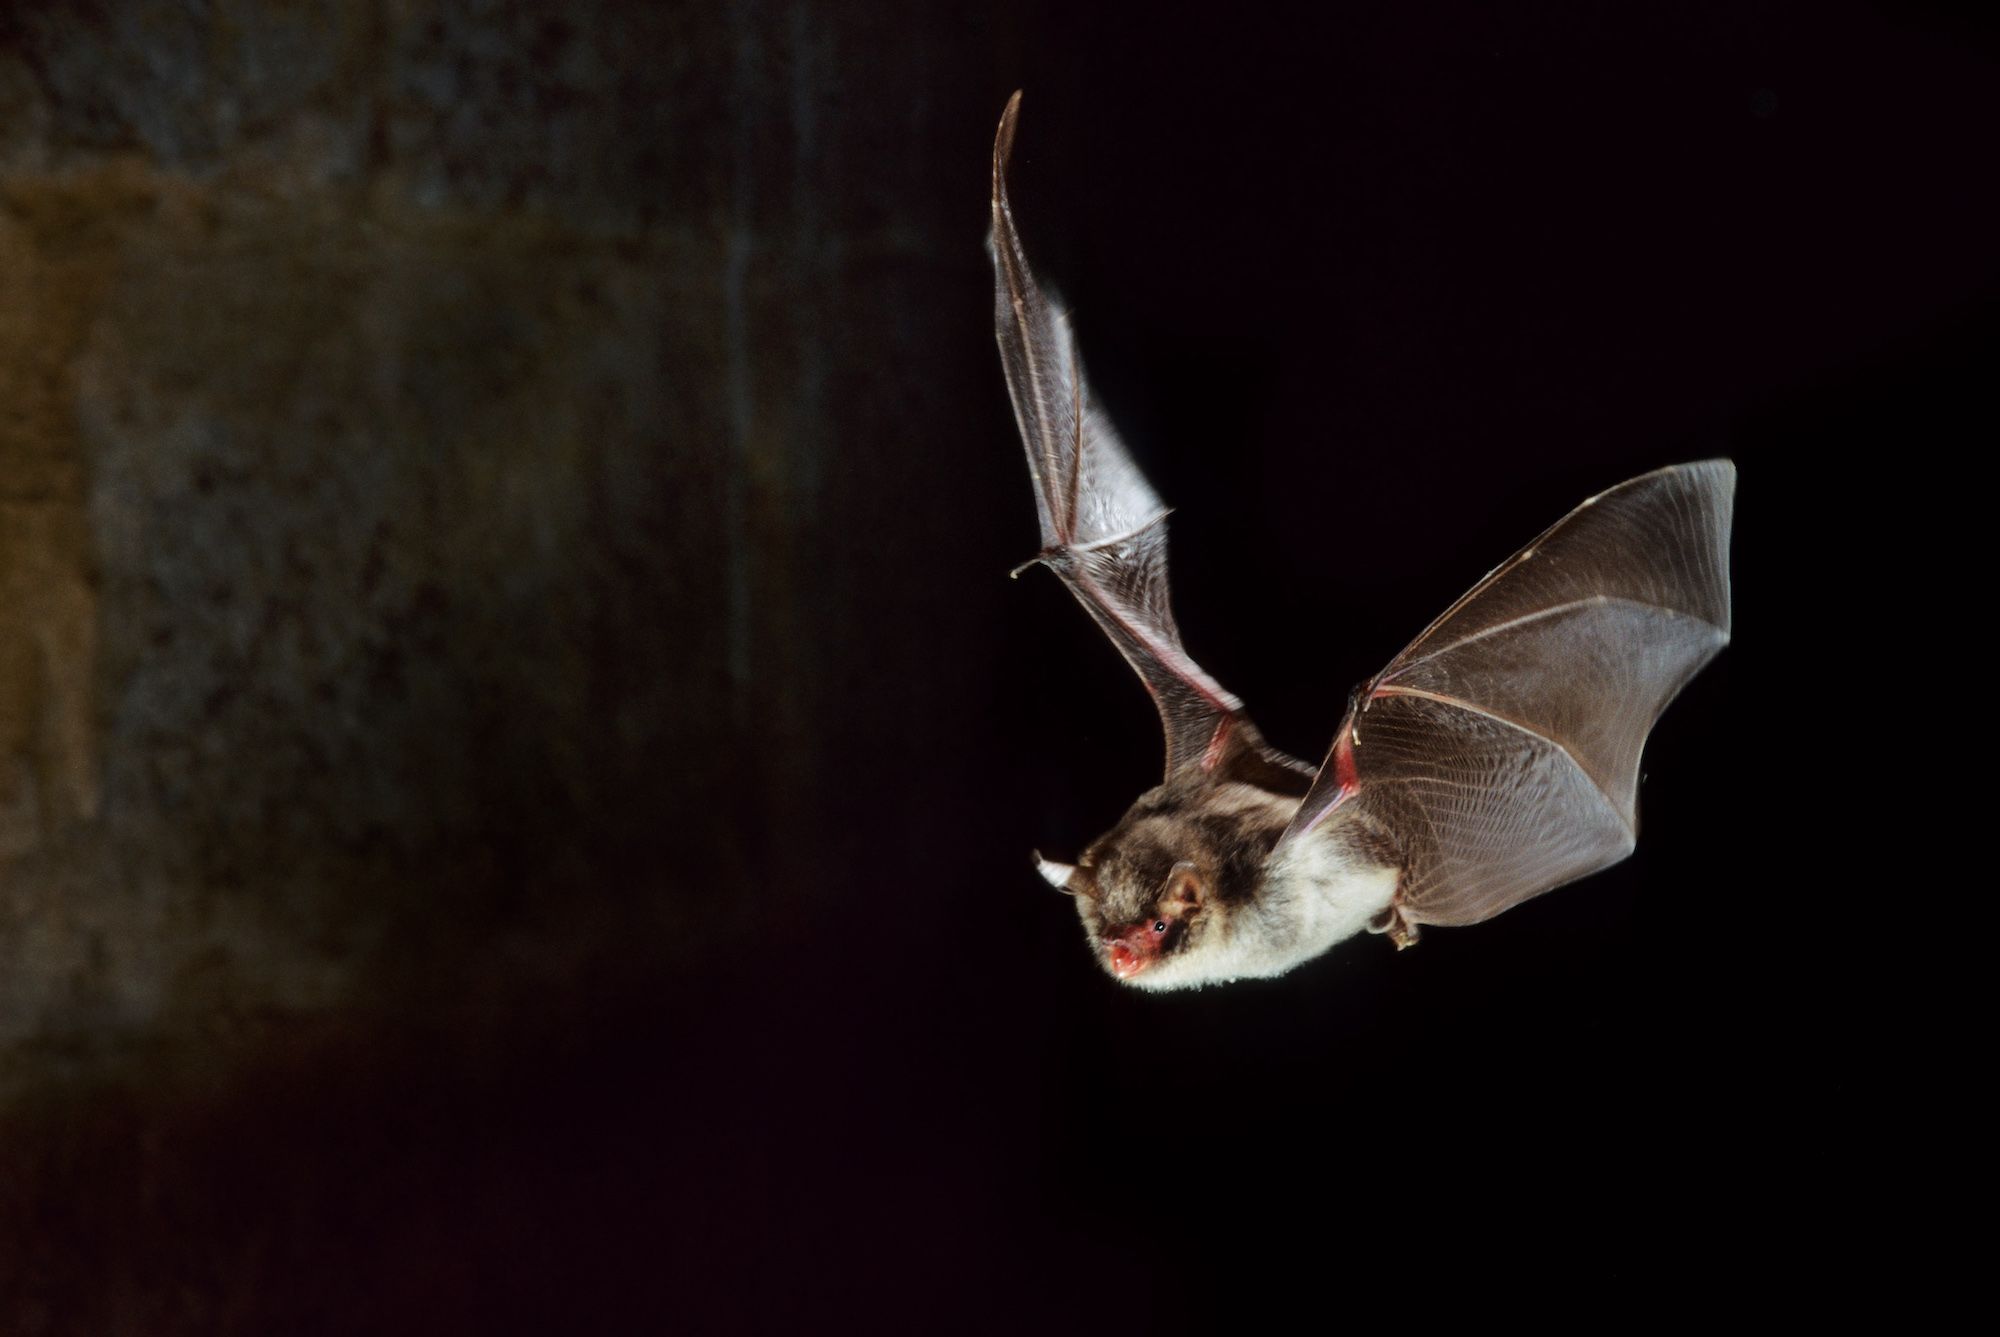 Bats use same techniques as death metal singers to vocalize, study finds |  CNN